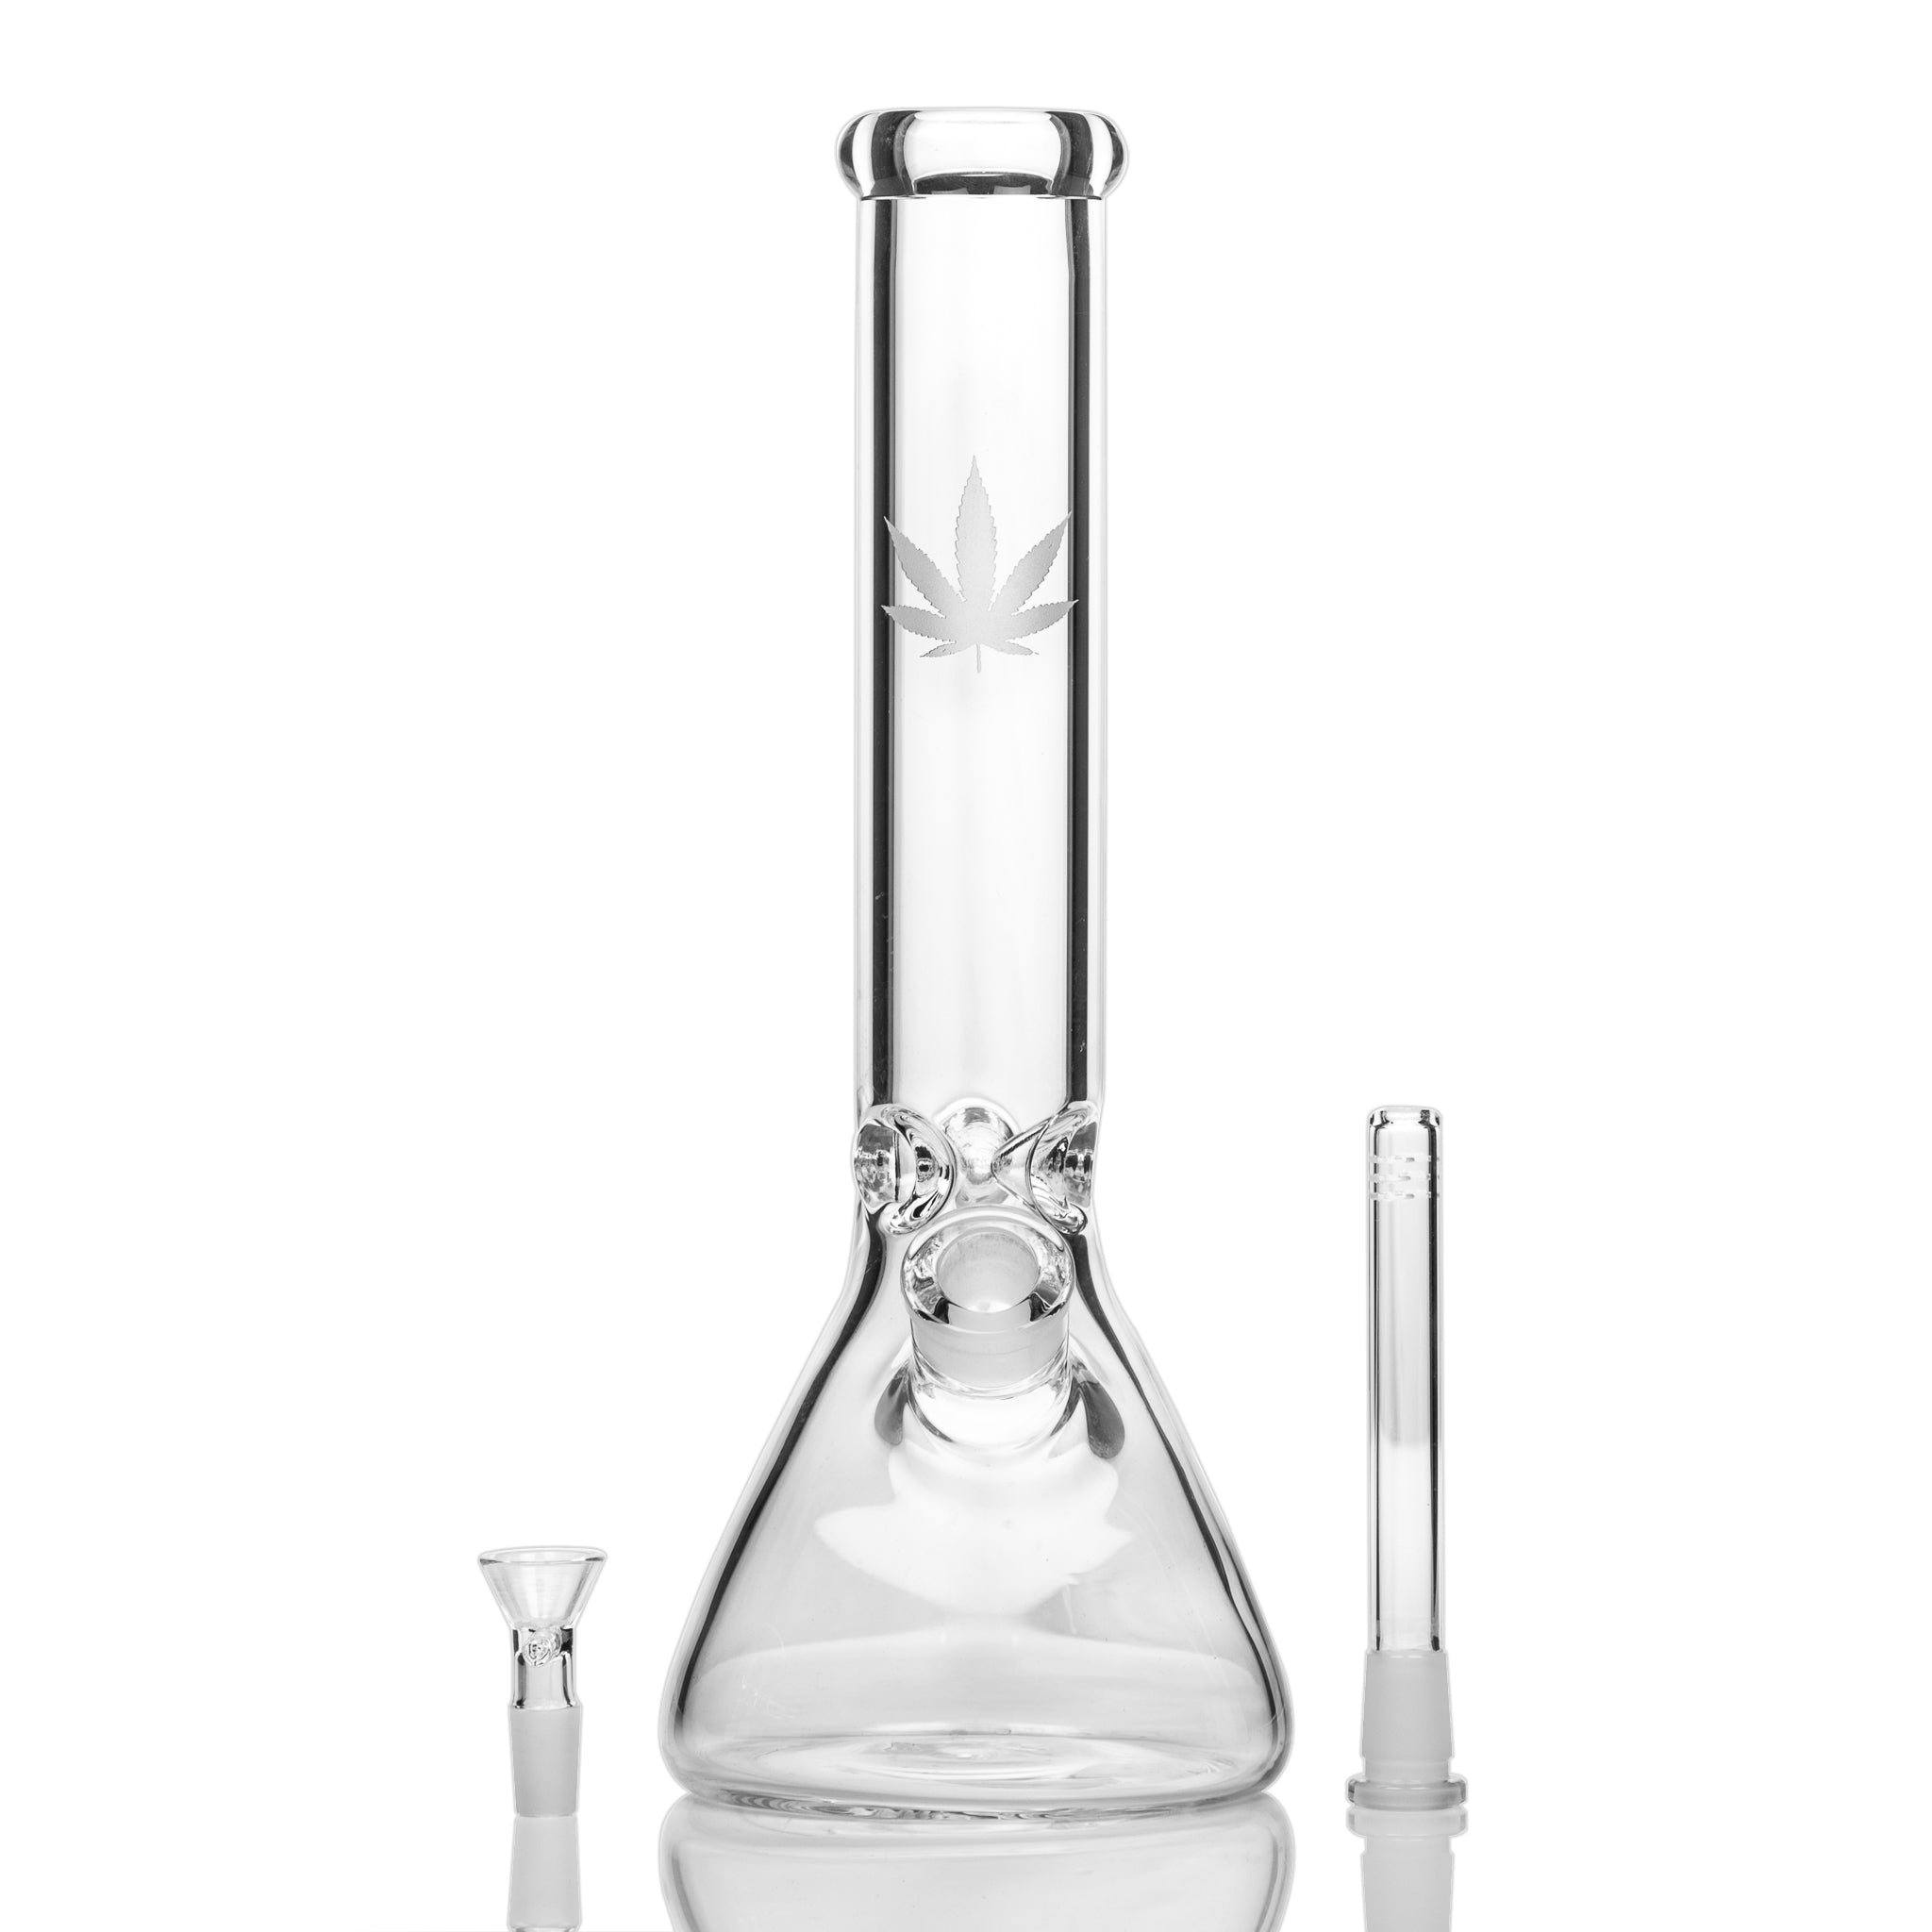 Very thick cheap glass beaker bong with free shipping for Australian customers.